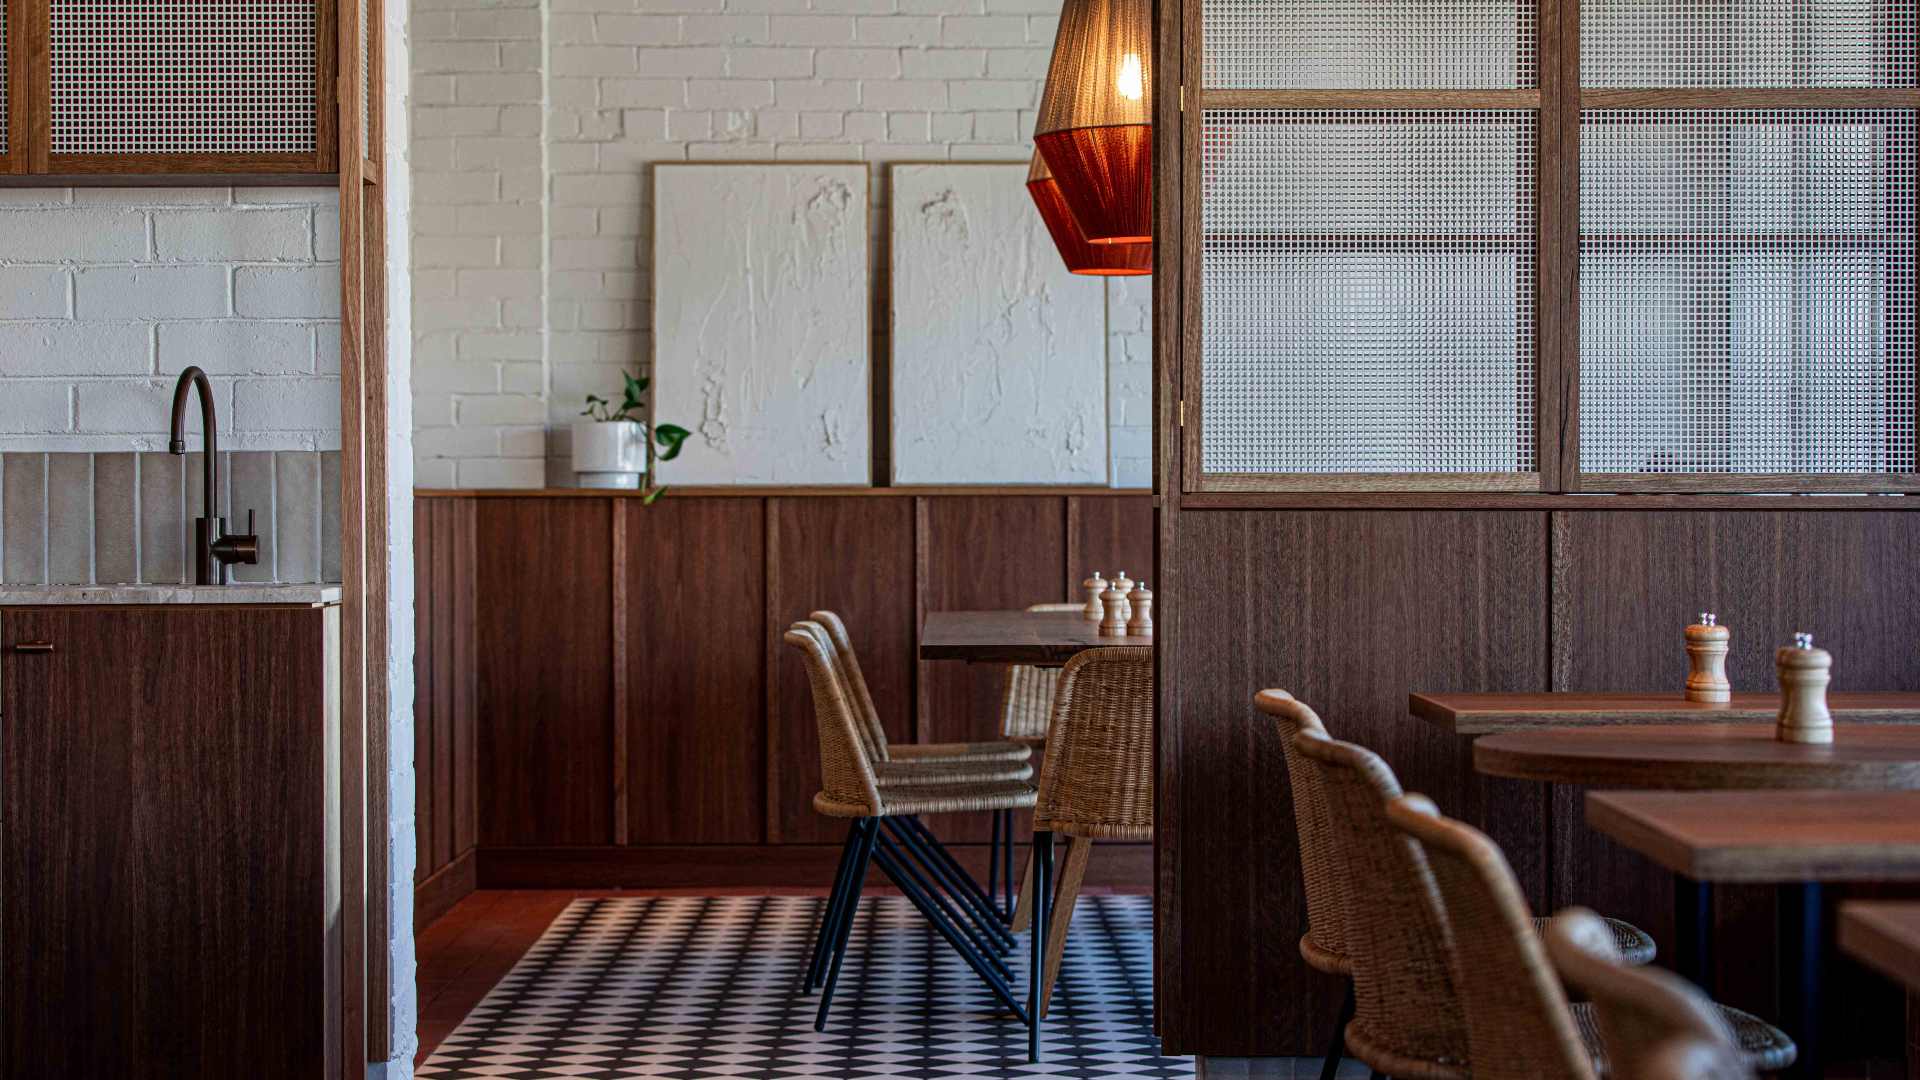 The dining room at Convoy cafe in Moonee Ponds.